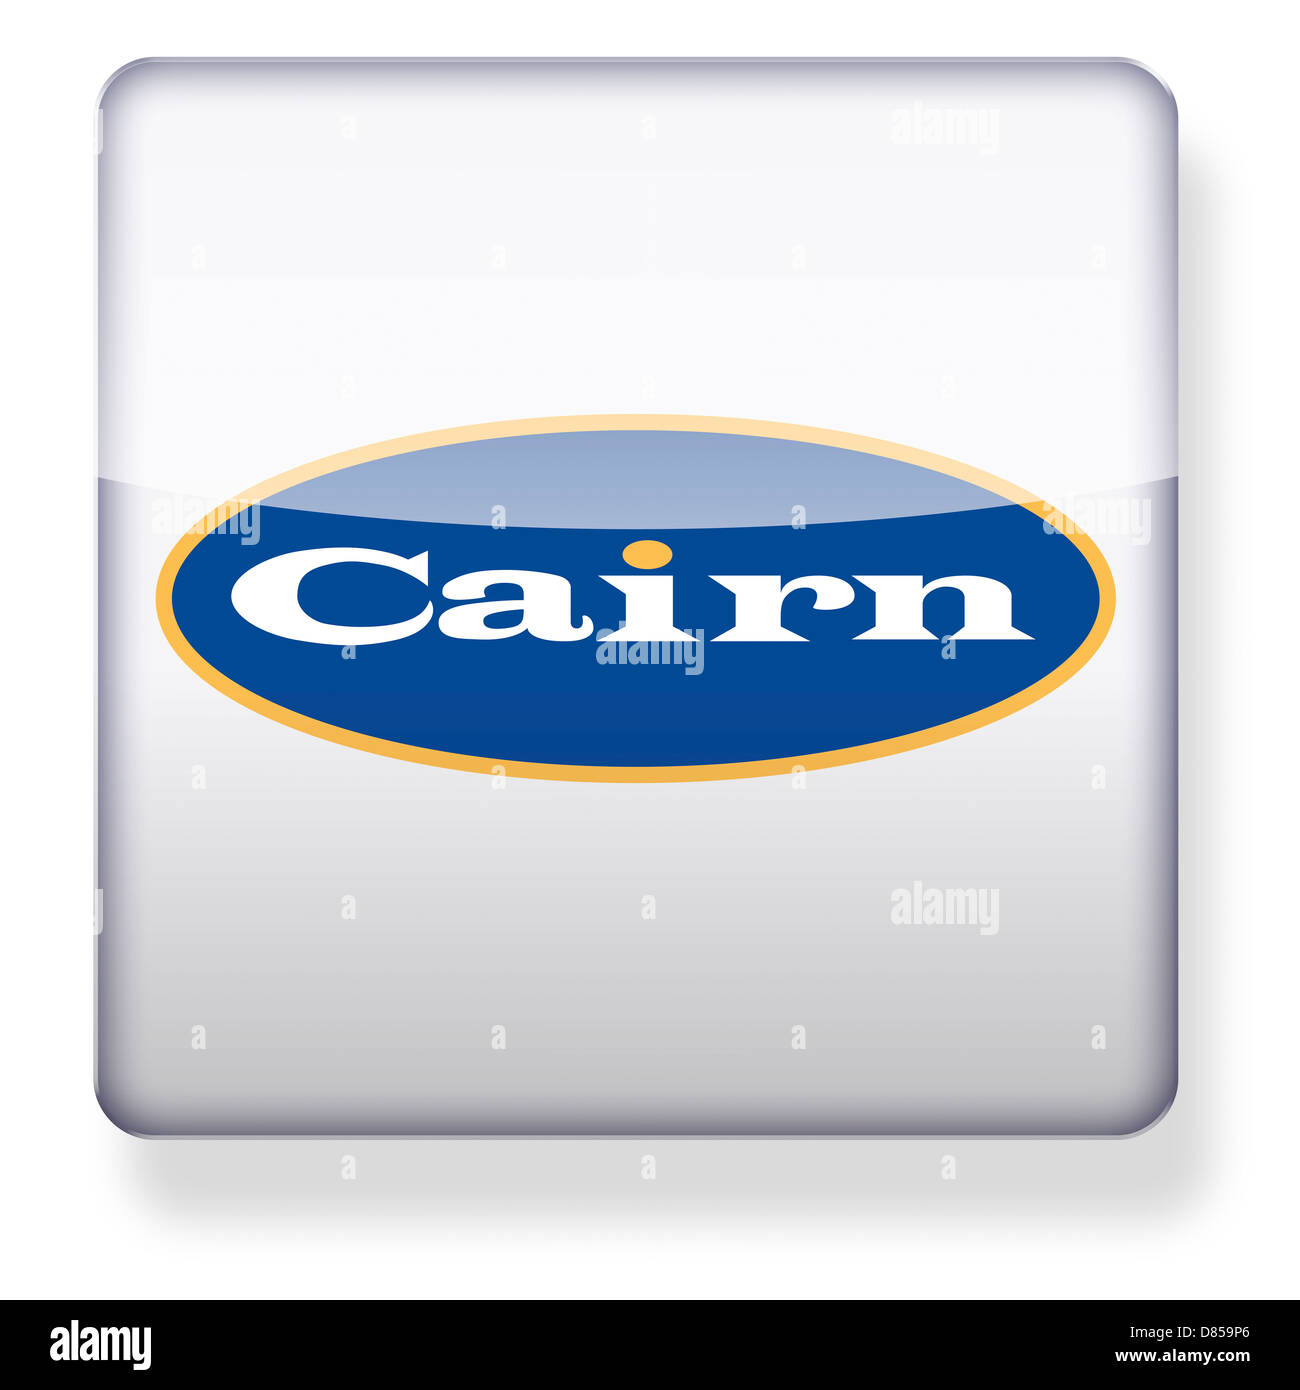 Cairn Energy logo as an app icon. Clipping path included. Stock Photo